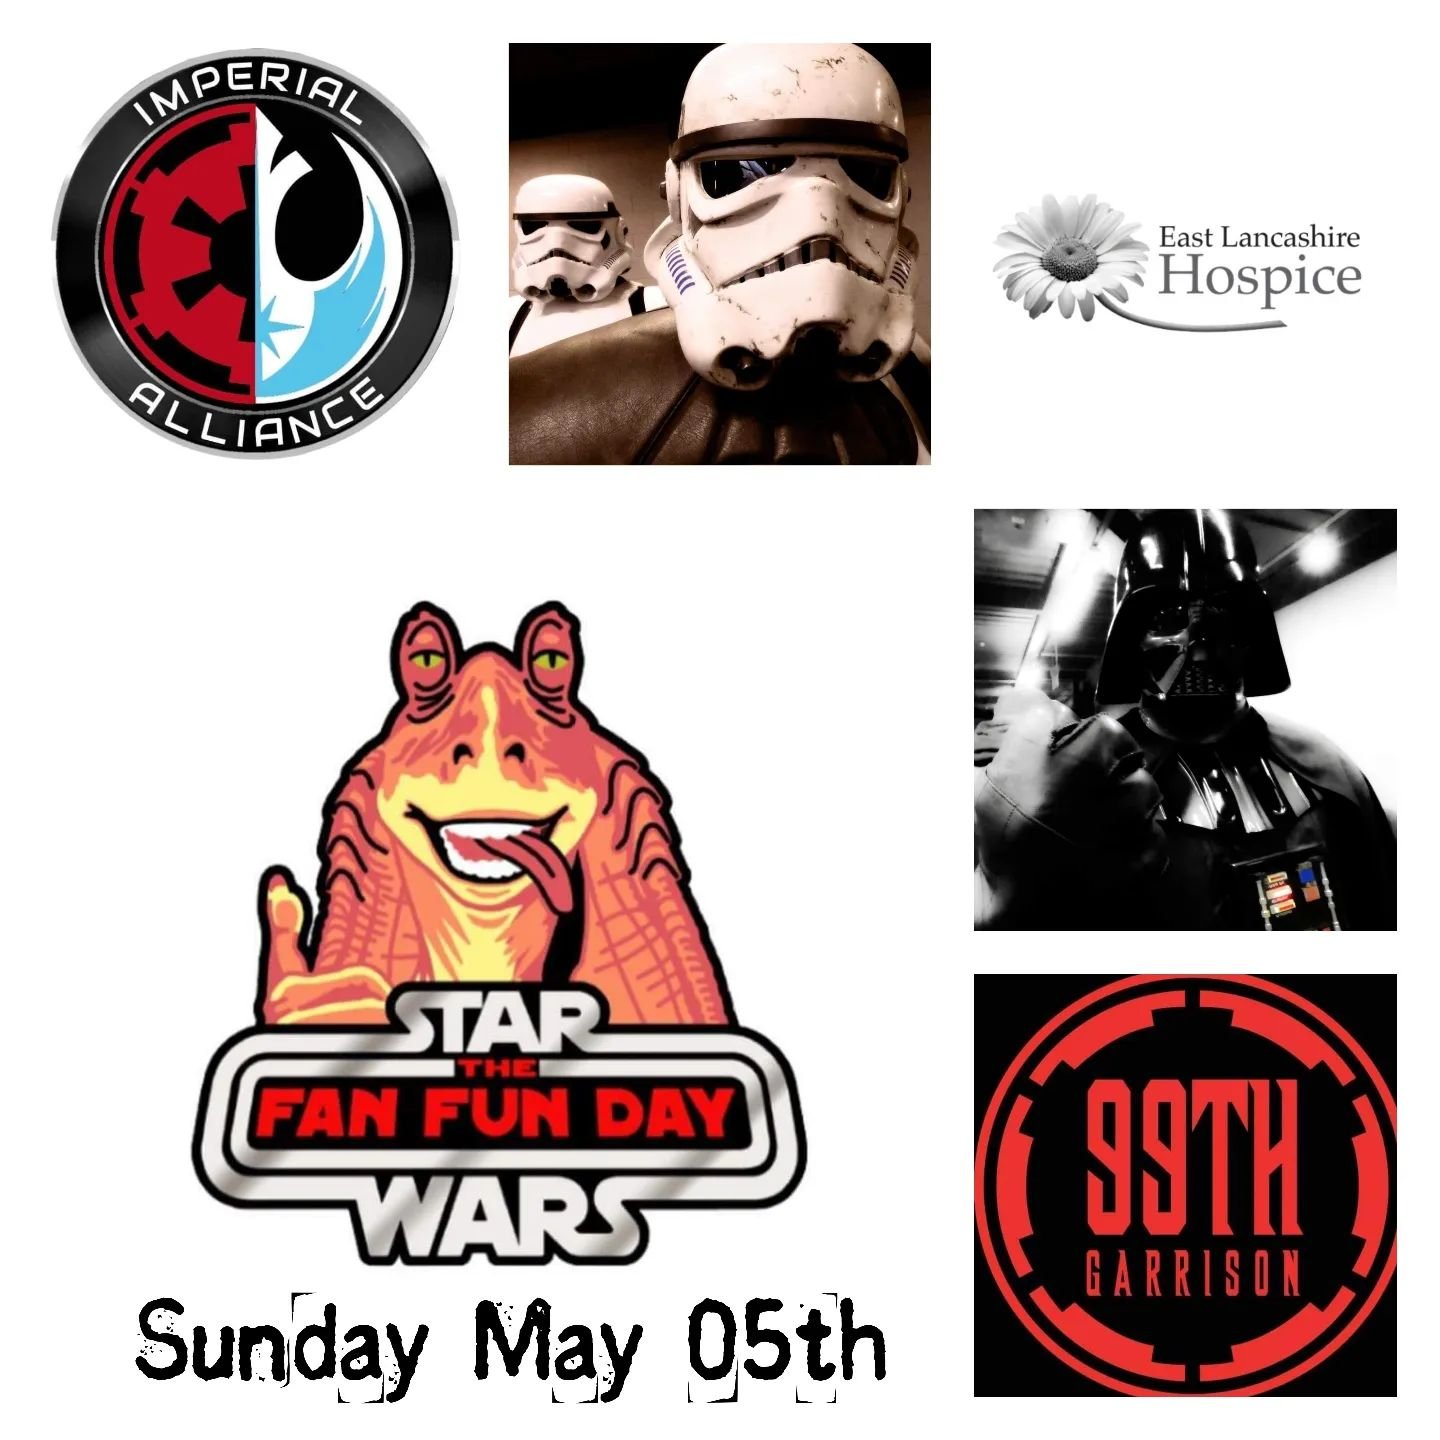 This Sunday we will be out on patrol with our friends from @imperial_allianceuk at @swffd. Helping raise much needed funds for @eastlancshospice 

#starwars #stormtrooper #vader #charitycosplay #swffd #ewoodpark